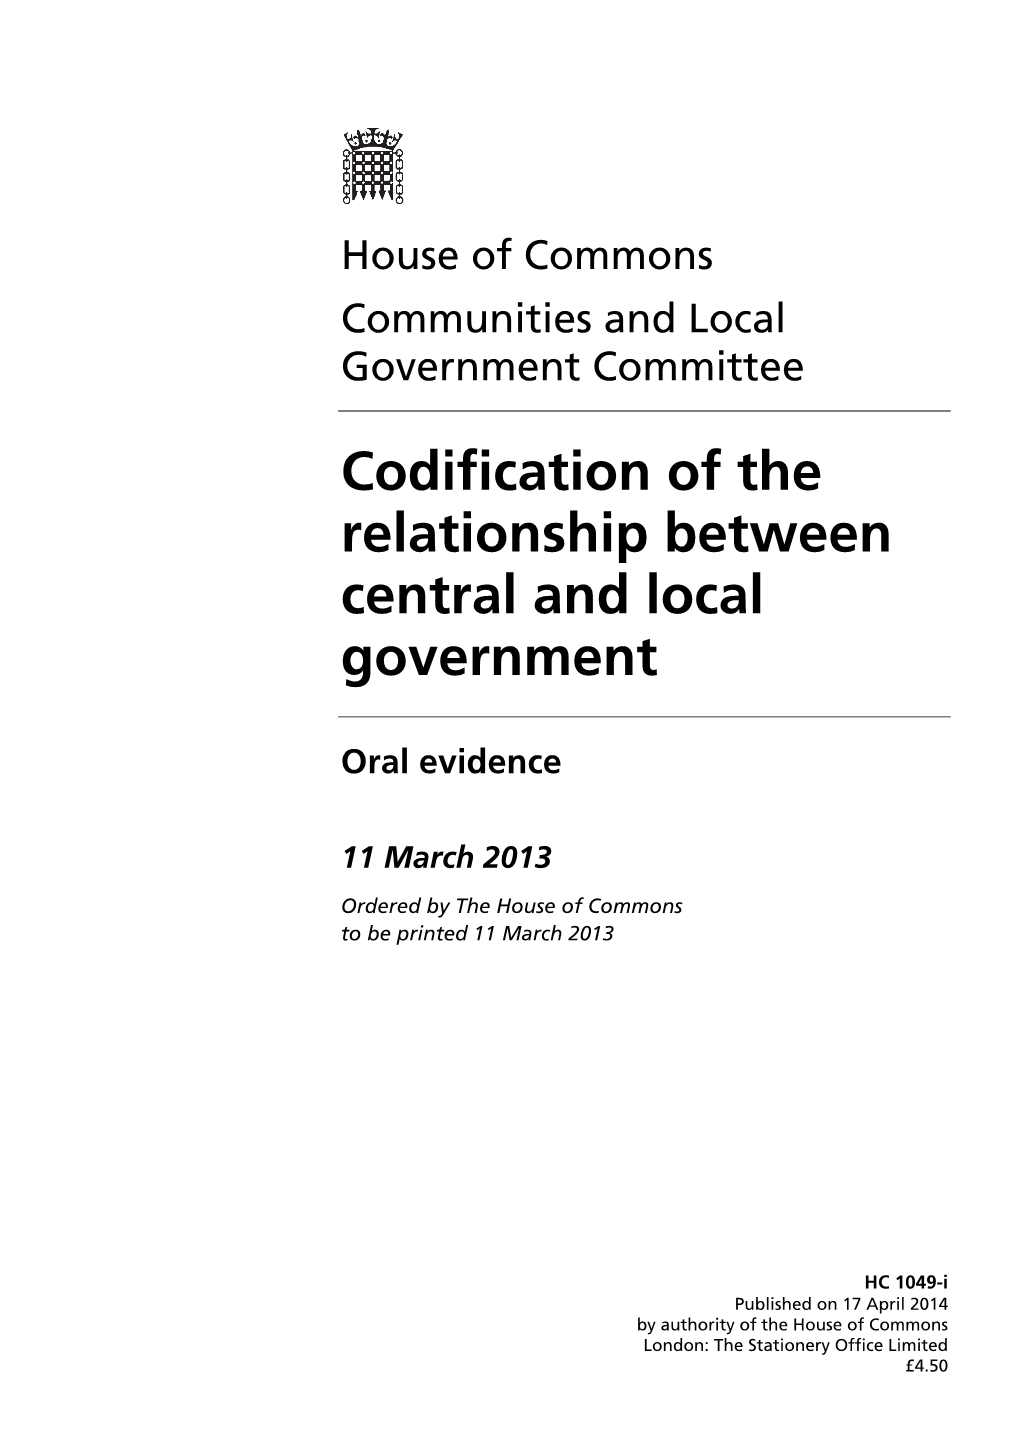 Codification of the Relationship Between Central and Local Government